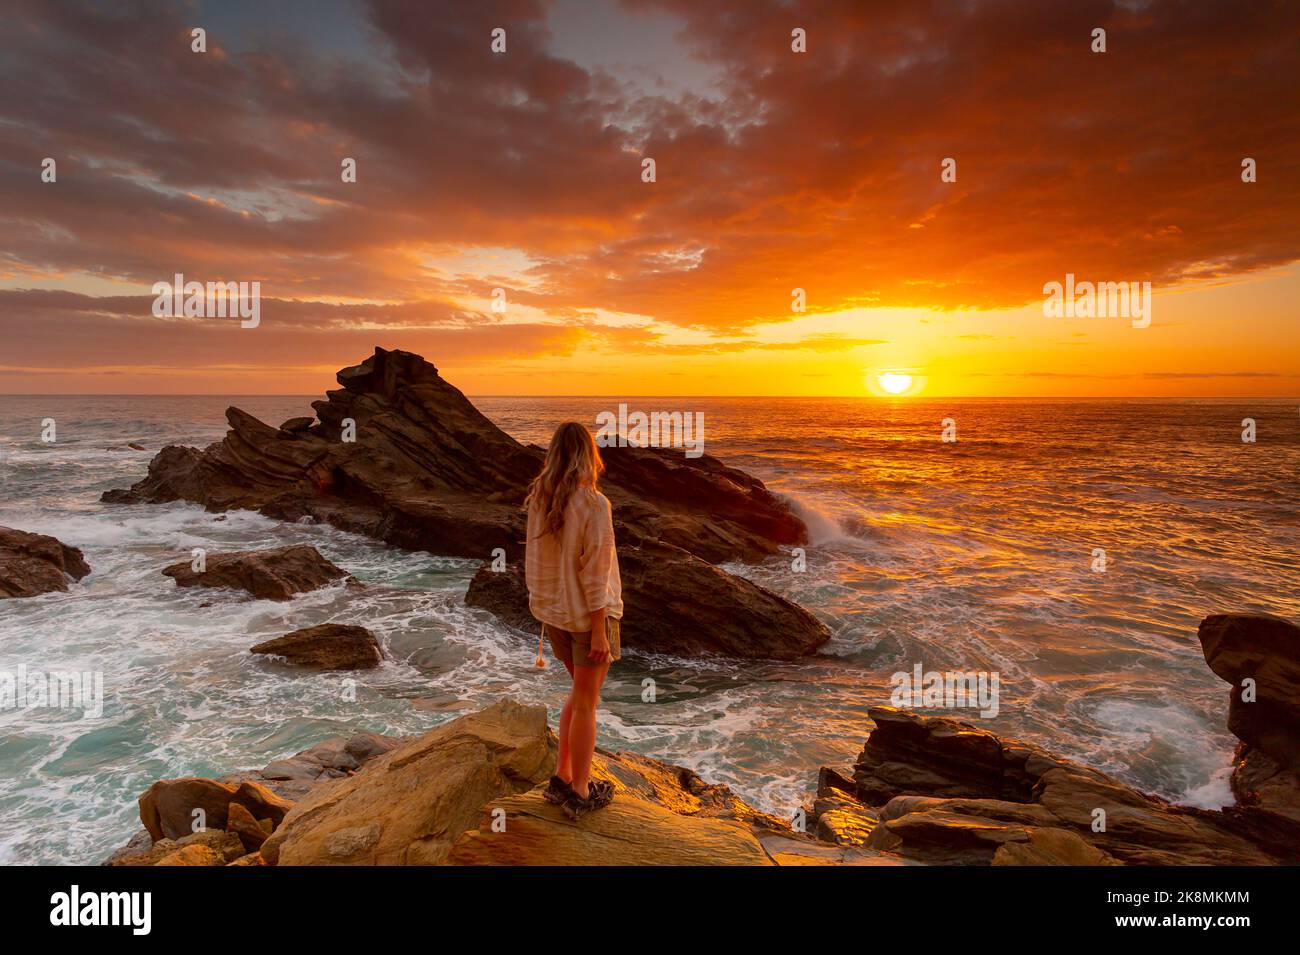 Woman wearing a casual cream linen shirt and shorts stands on a rock watching a vivid red sunrise over the ocean as waves crrash around her Stock Photo